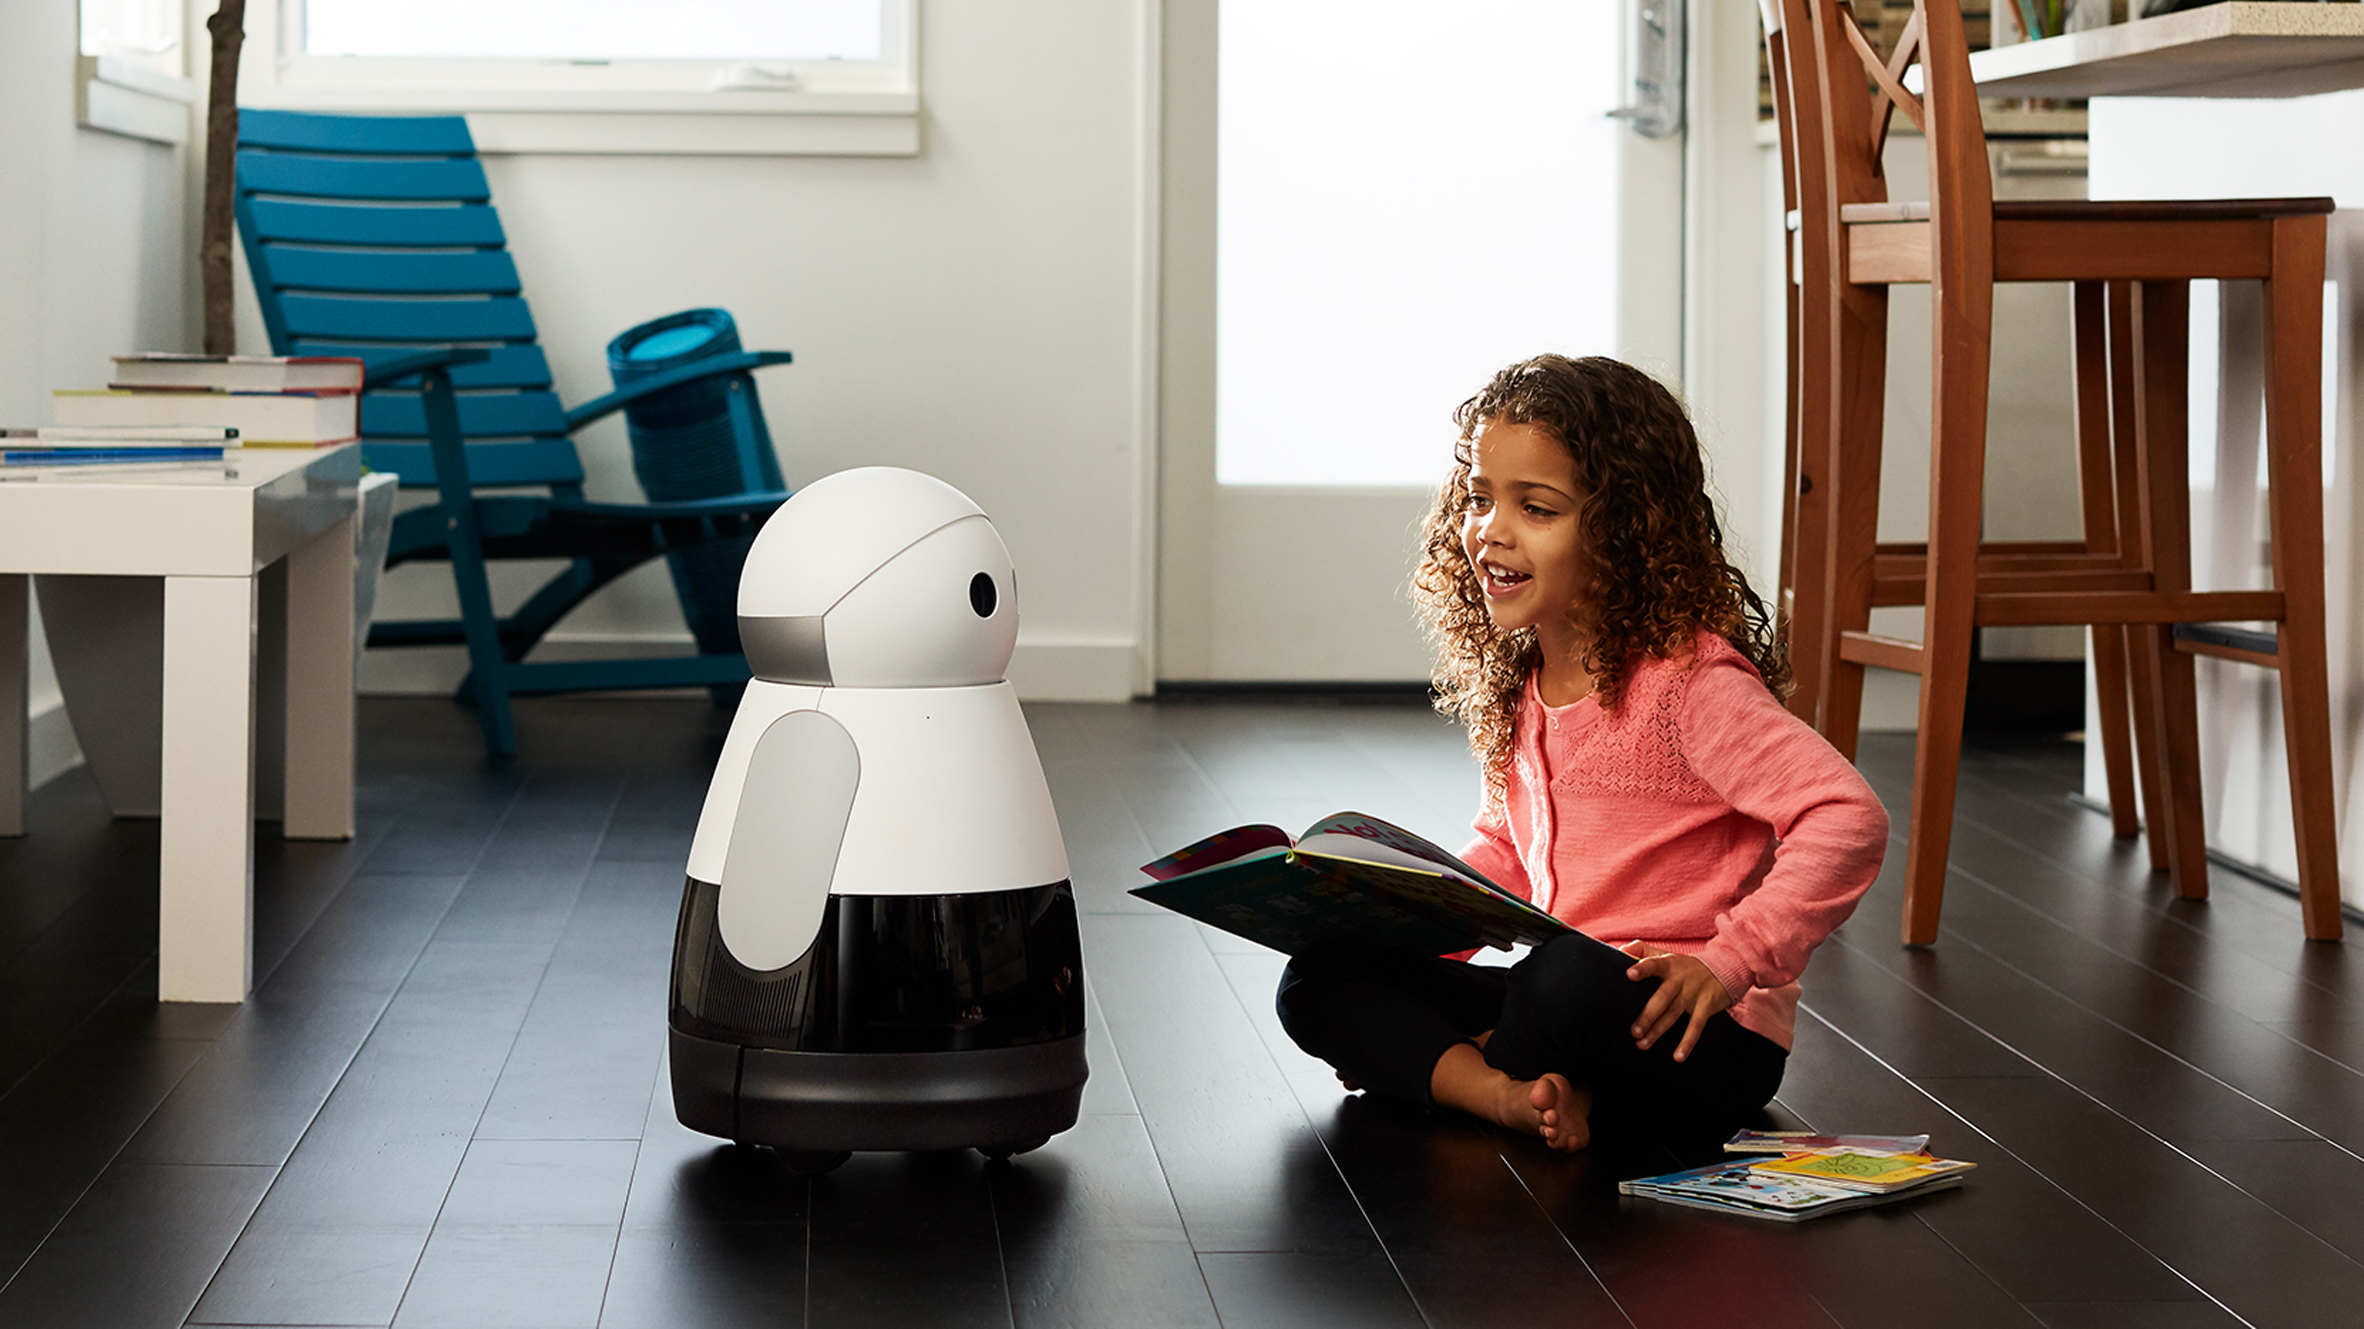 Støt personificering flugt Kuri is an "insanely cute" home robot with its own facial expressions